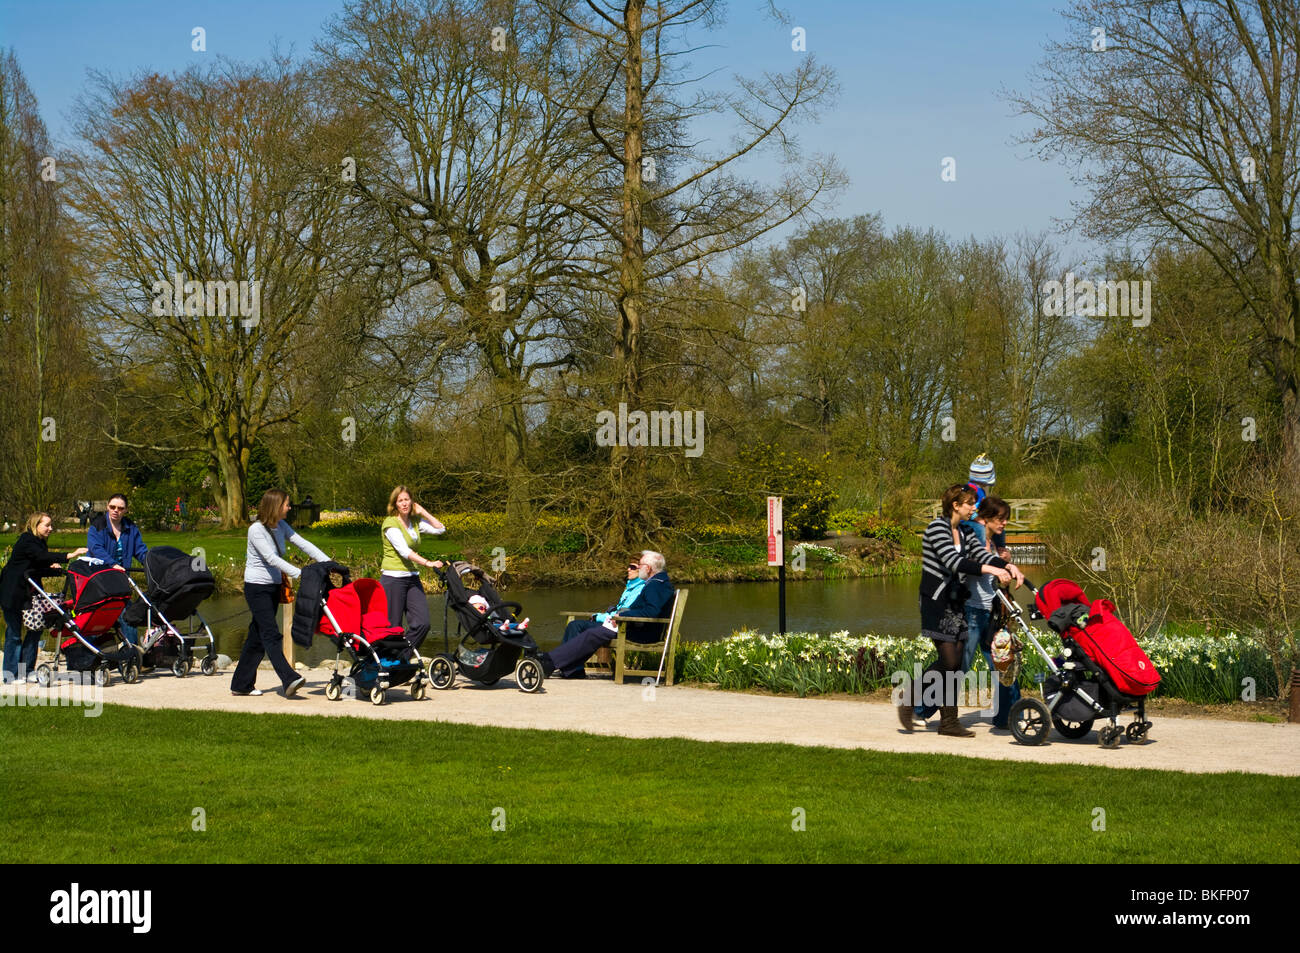 A Group Of Mothers people Pushing Pushchairs Around walking in Park RHS Wisley Gardens Surrey England Stock Photo